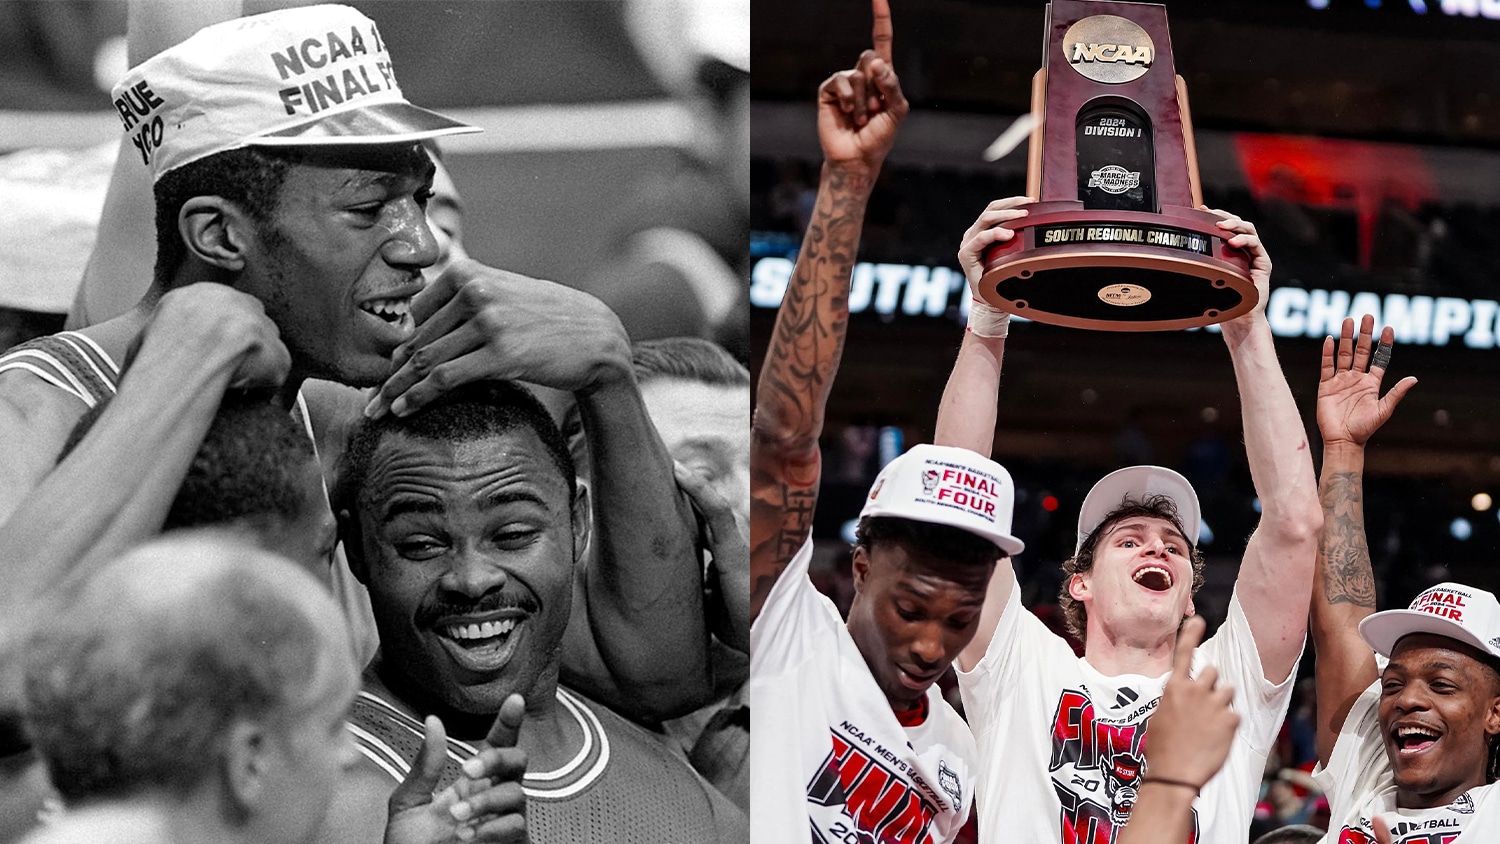 Side by side photos of the 1983 men's basketball team and the 2024 men's basketball team members celebrating their advance to the Final Four of the NCAA Basketball Tournament